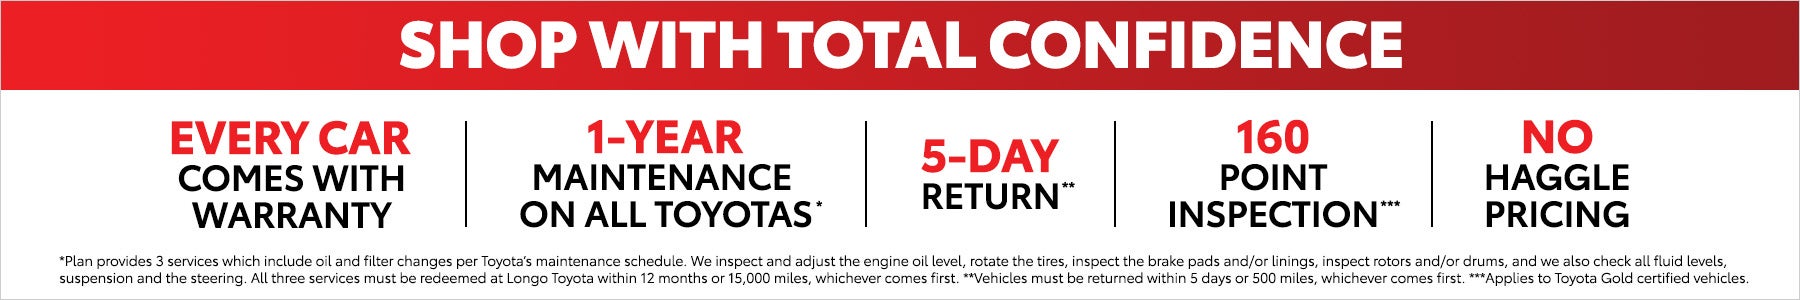 Shop with total confidence